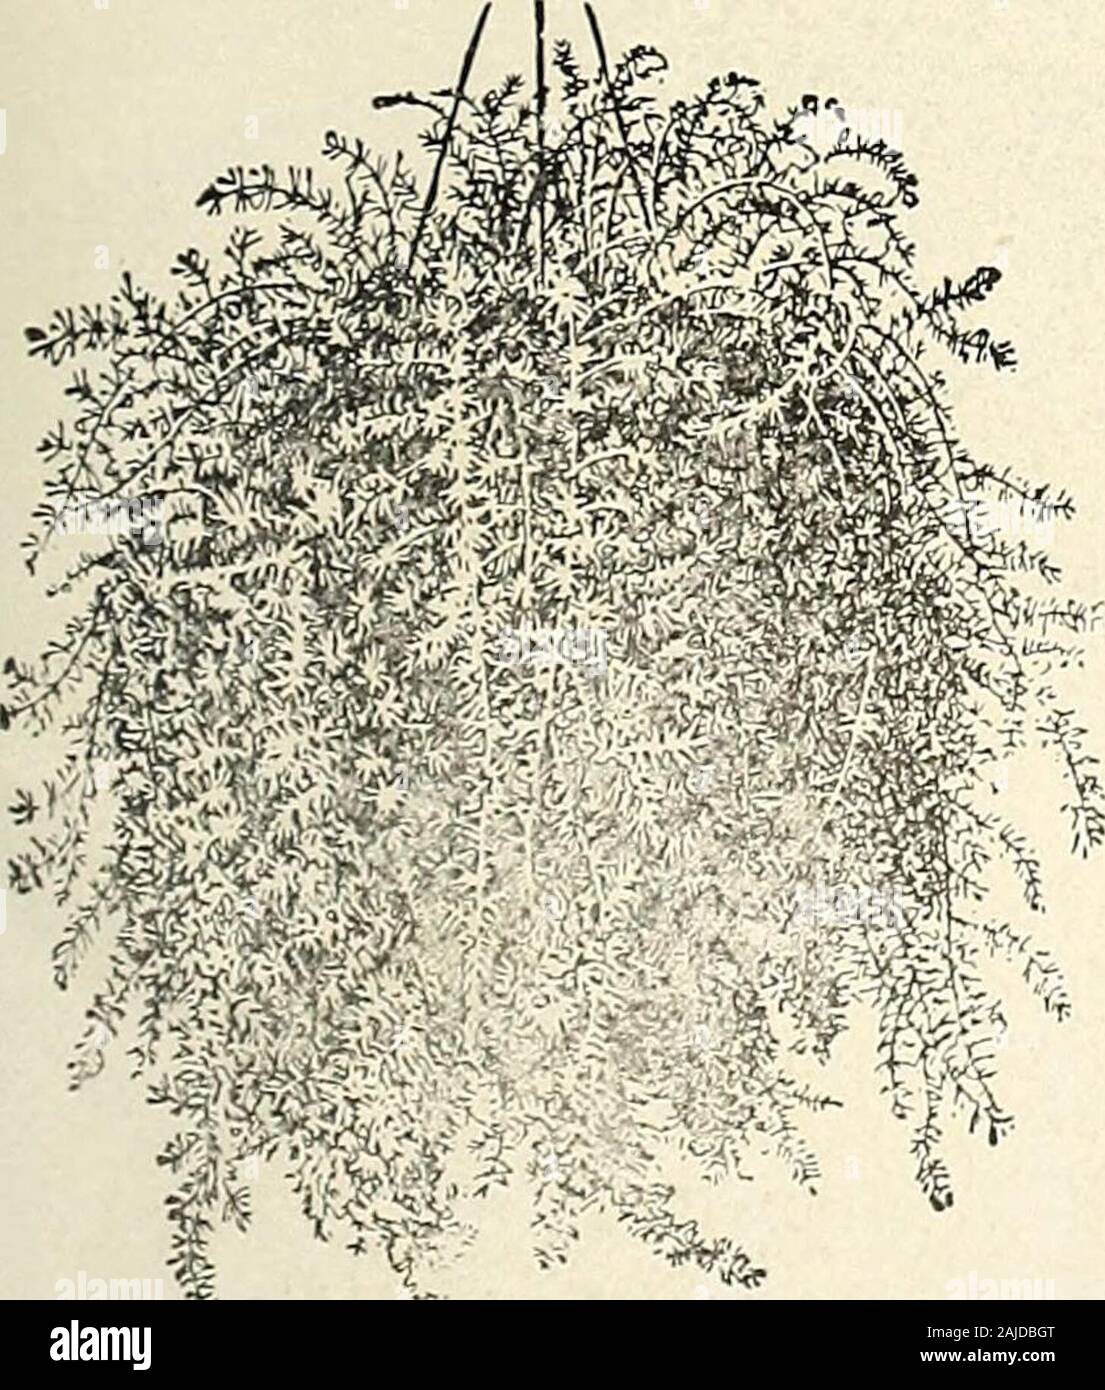 H.W Buckbee seed and plant guide : 1905 . etc. 15c. each. Ken tia Belmoreana—The curly palm leaves pinnate, the divisions taper pointed. One of the very best for all purposes. 20c. each. Seaforthia Elegans—One of the most graceful of all, bearing long, curving pinnate leaves of rare beauty. A magnificent plant for jardiniere orcenter of large tropicul bed. 15c. each* Phoenix Canariensis—Beautiful strong-growing Palm with dark green glossy foliage. Is very easily grown, and is sure to please purchaser. 15c. each. Cocos Weddelliana—The most elegant and graceful of all the smaller Palms. Its slen Stock Photo